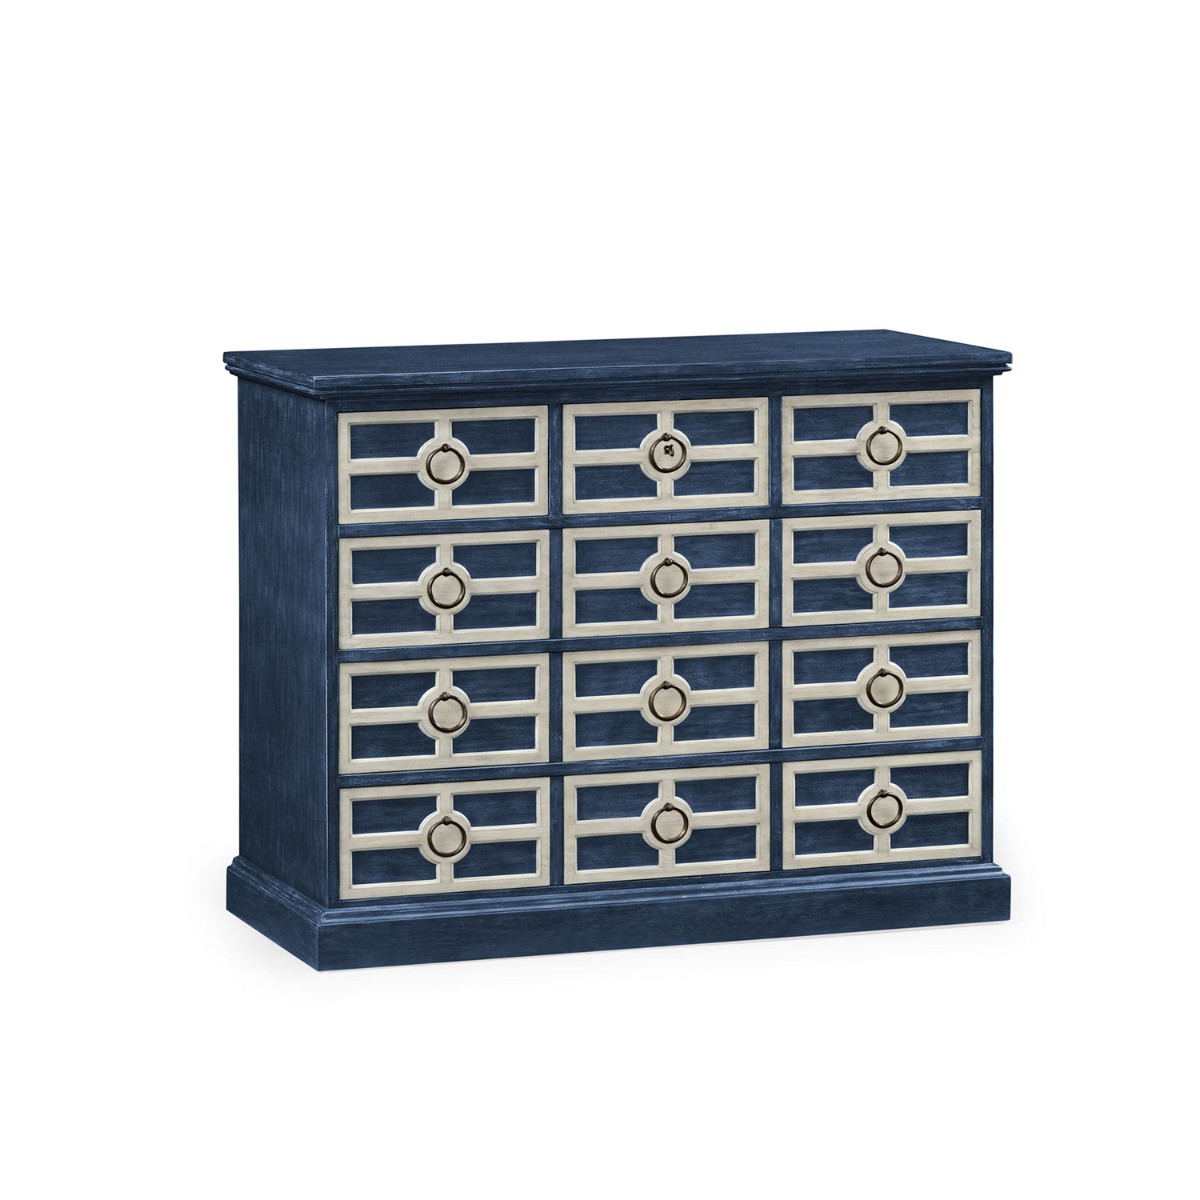 William Yeoward Midmoor Chest Of Drawers Blue Painted